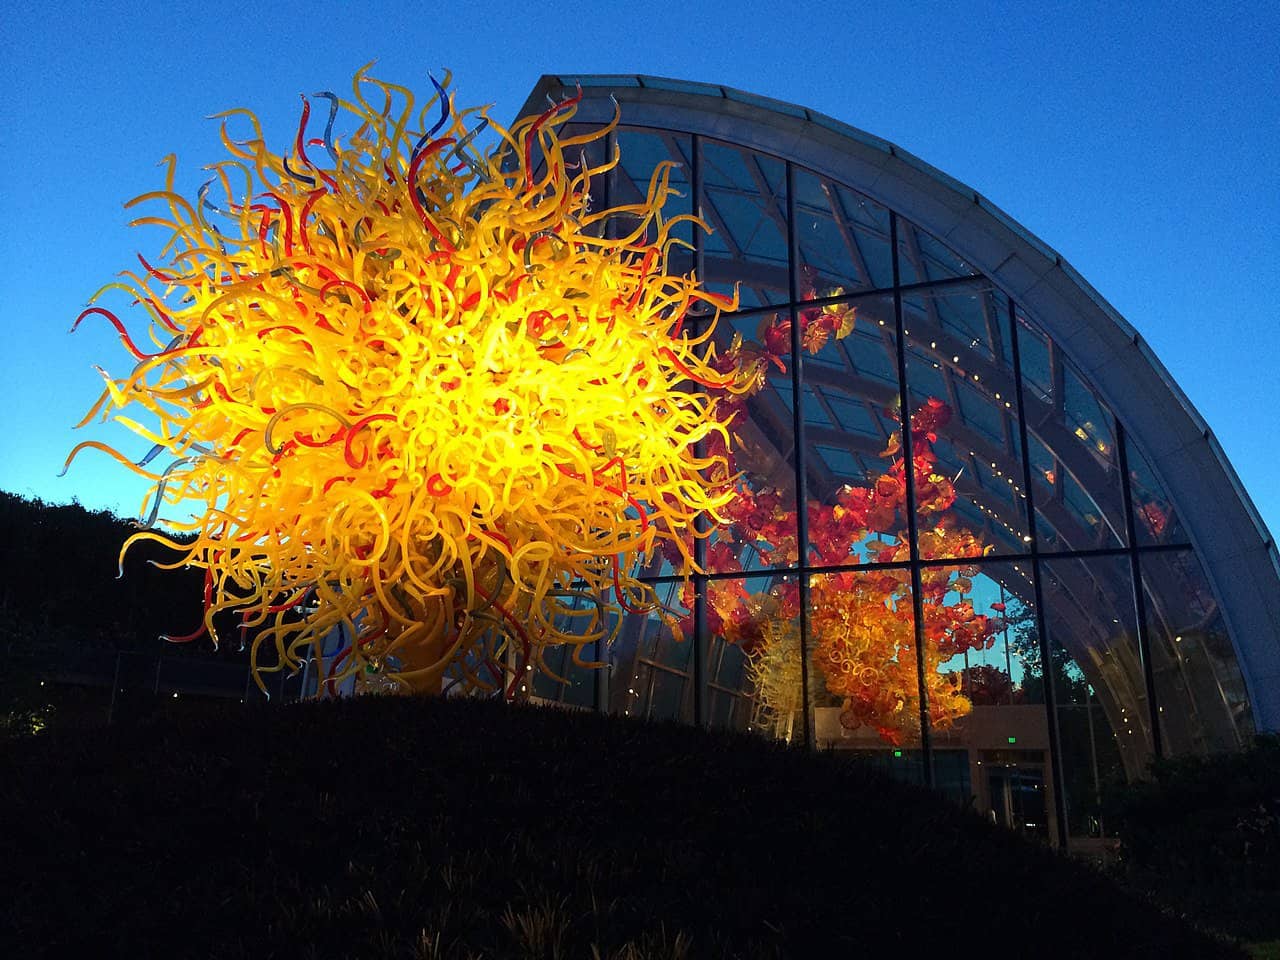 The 25 Best Museums in the US – Chihuly Garden and Glass